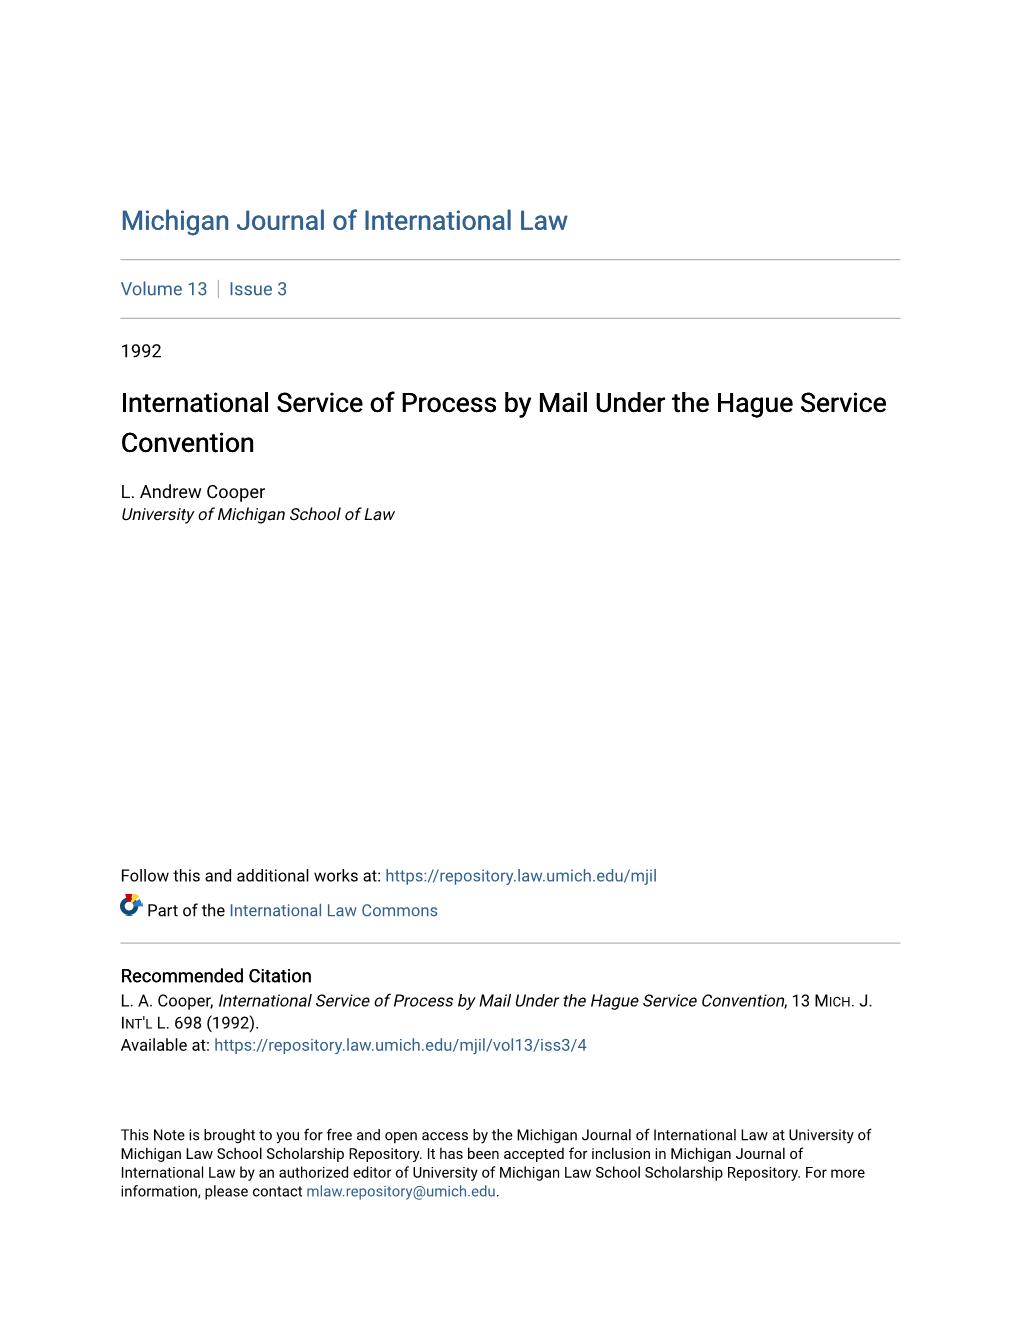 International Service of Process by Mail Under the Hague Service Convention